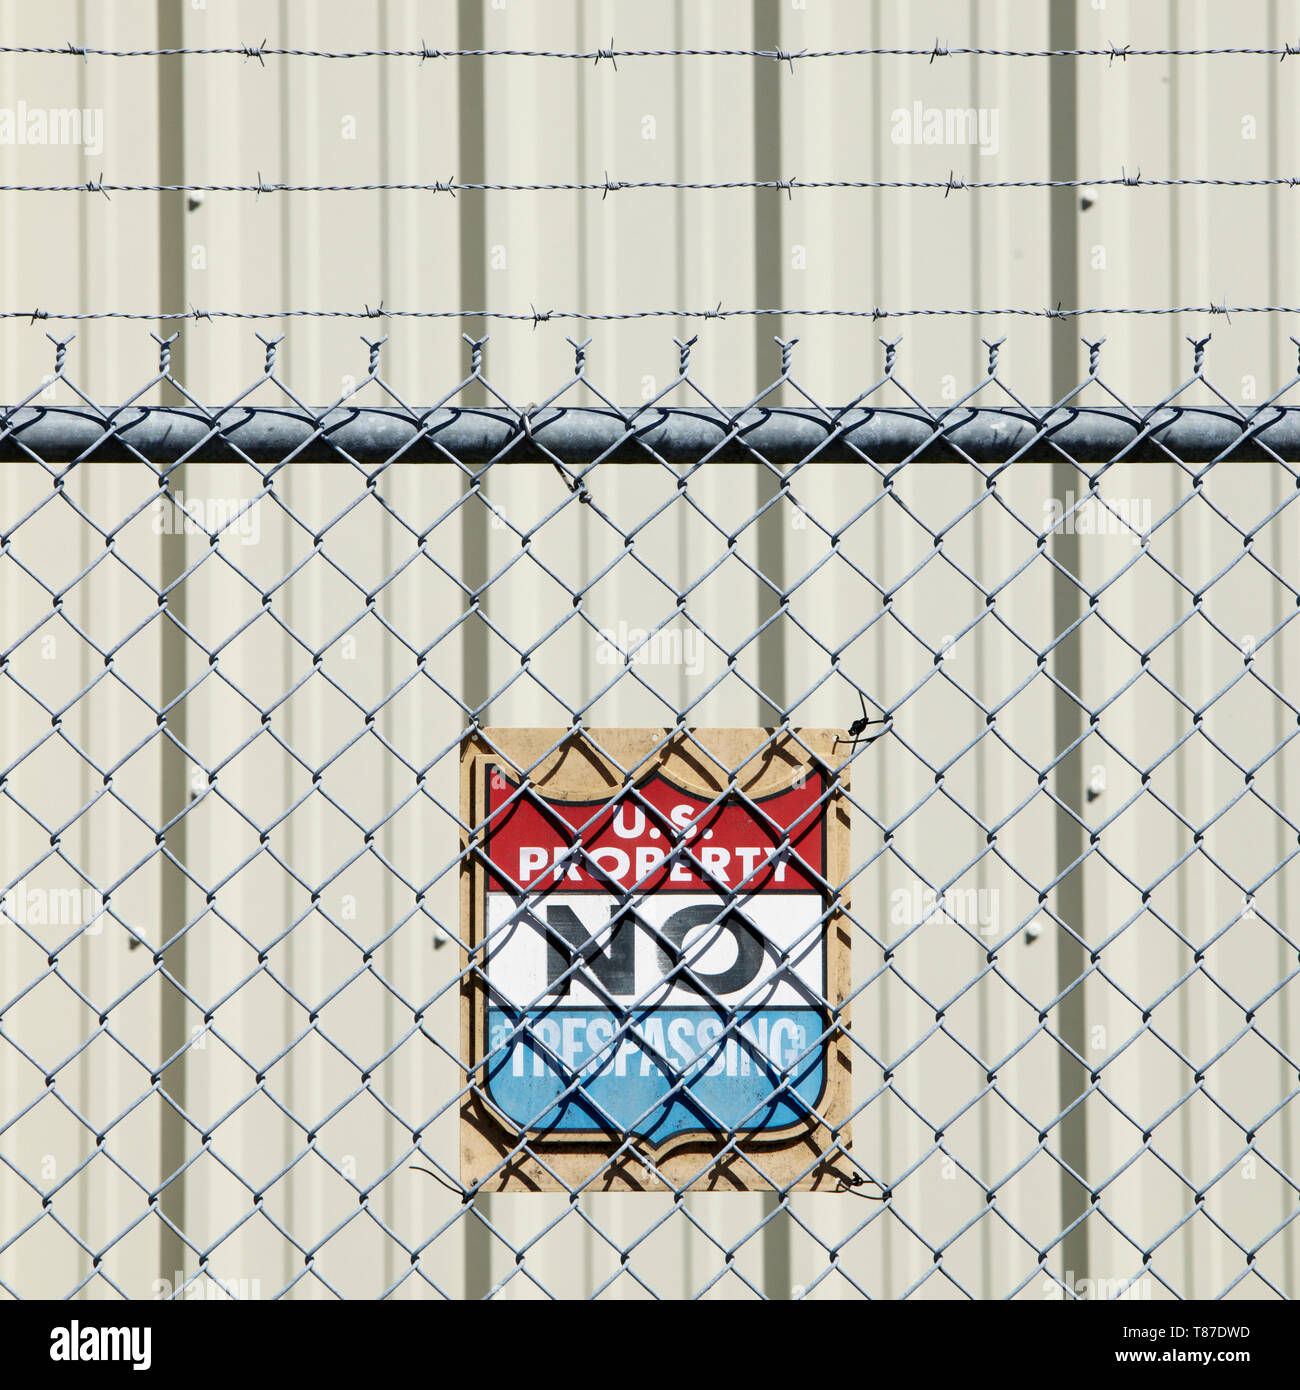 Warning Sign and Fence Stock Photo